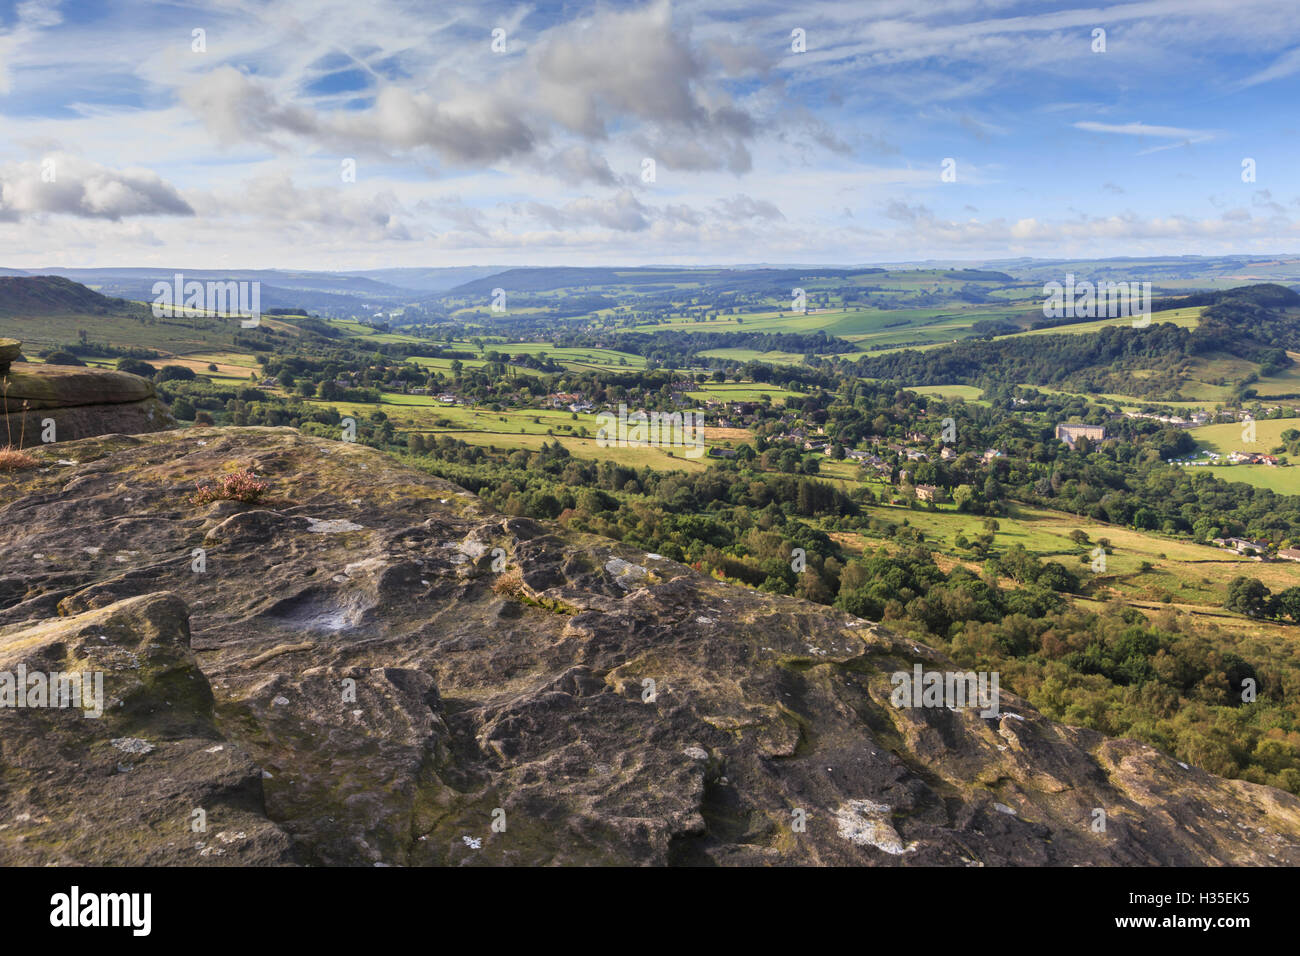 View towards Chatsworth from Curbar Edge, with Calver and Curbar villages, Peak District National Park, Derbyshire, England, UK Stock Photo